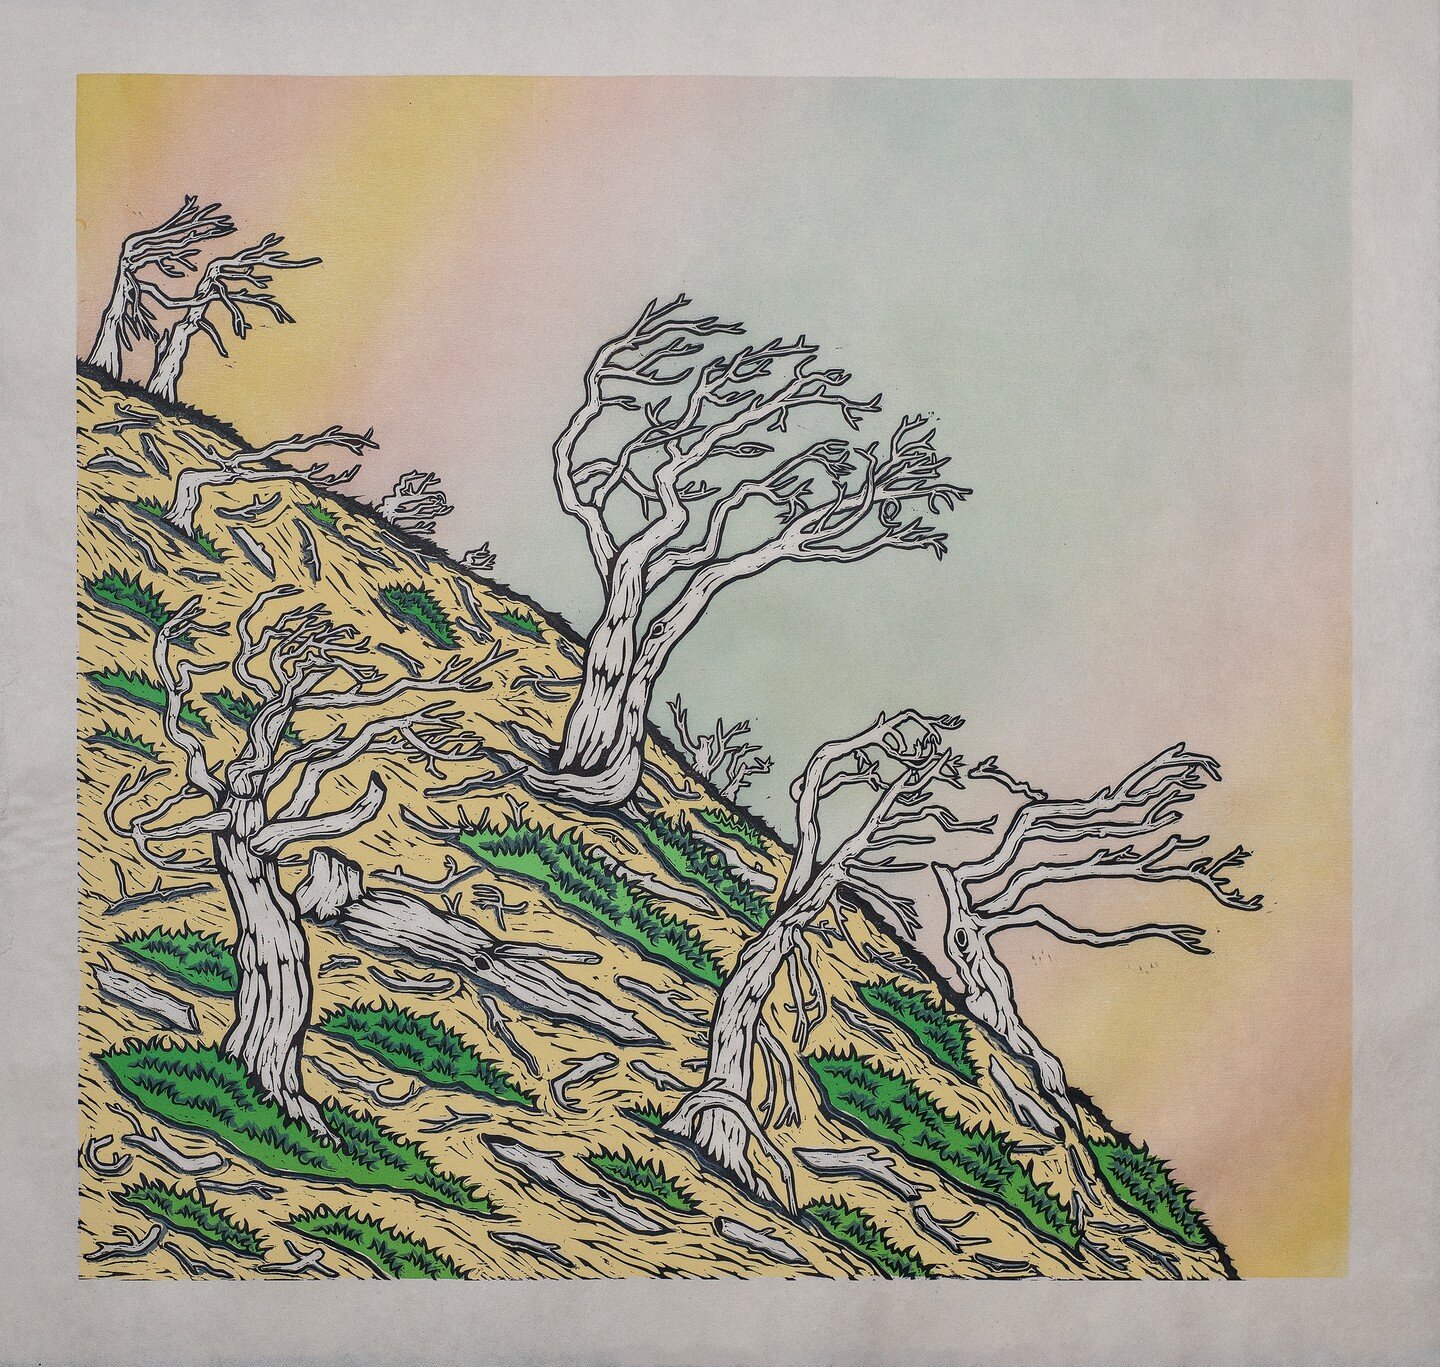 &quot;Whitebark Pine, Death of a Keystone in the Rockies&quot; 

Color Woodcut with silkscreen

Image credit: Seth Dahlseid
#printmaking #woodcut #screenprinting